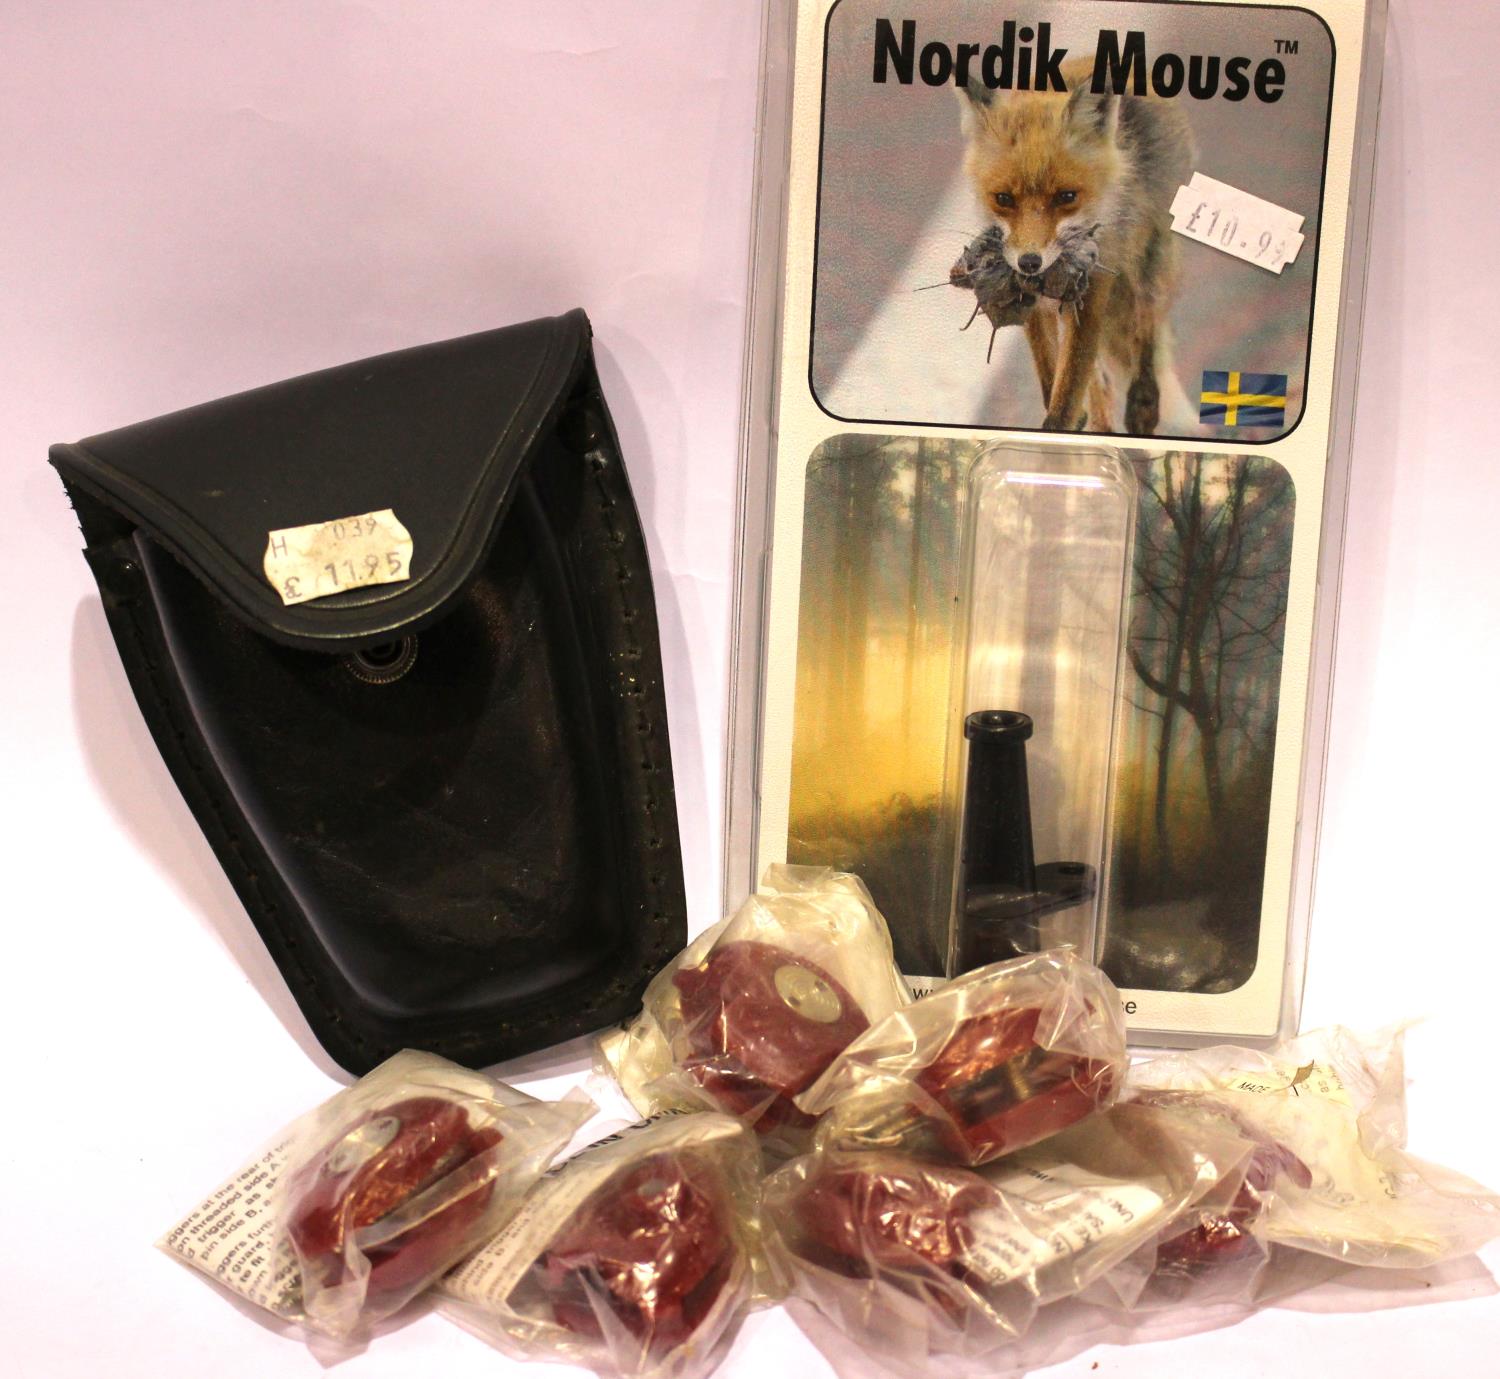 Six new old stock trigger locks, Nordik Mouse and a leather holster. P&P Group 2 (£18+VAT for the